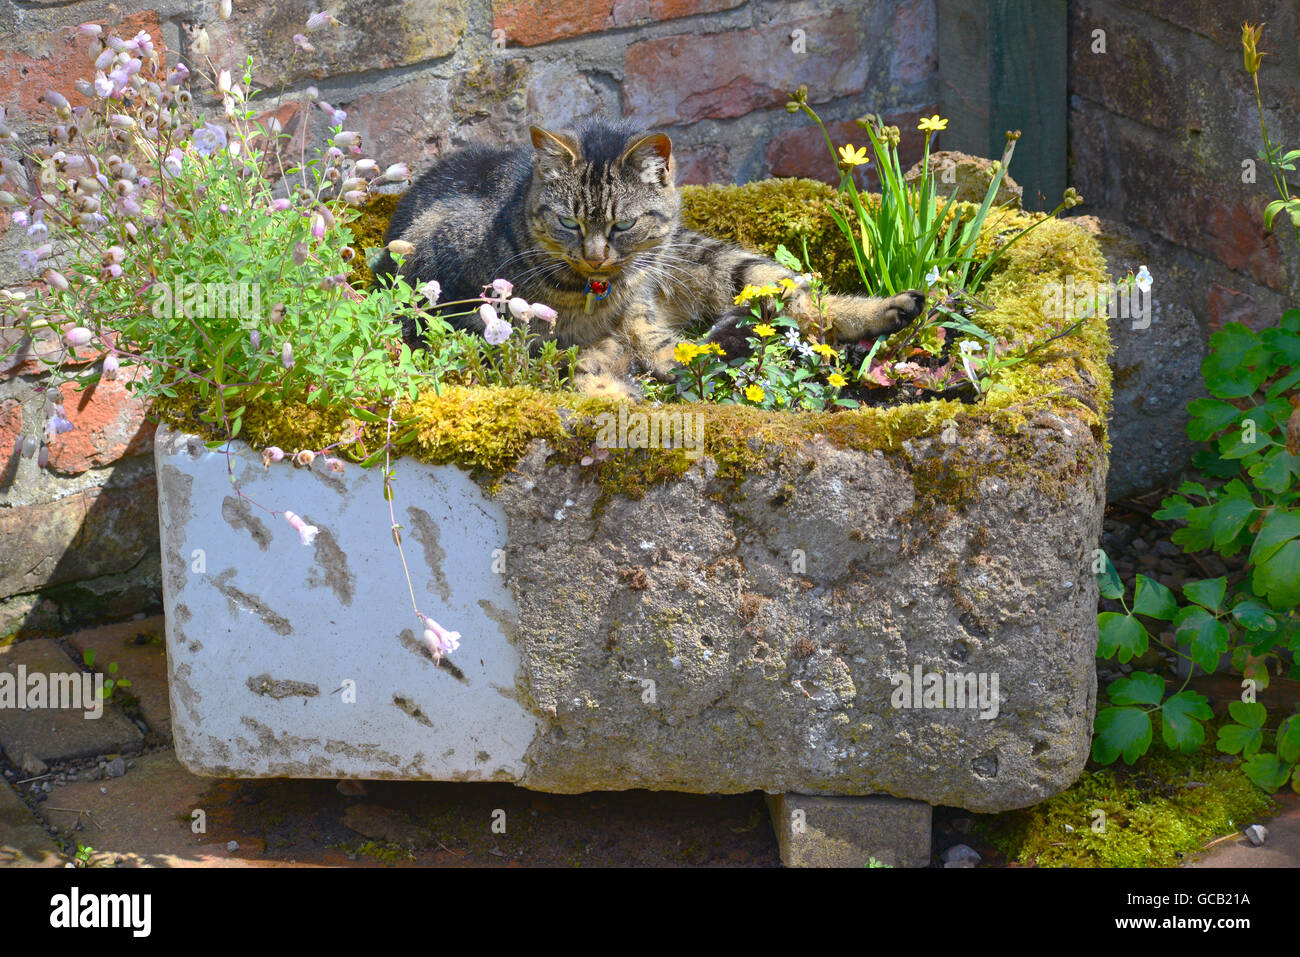 Tabby Cat Enjoying Sunshine Laid In Old Belfast Sink Used As